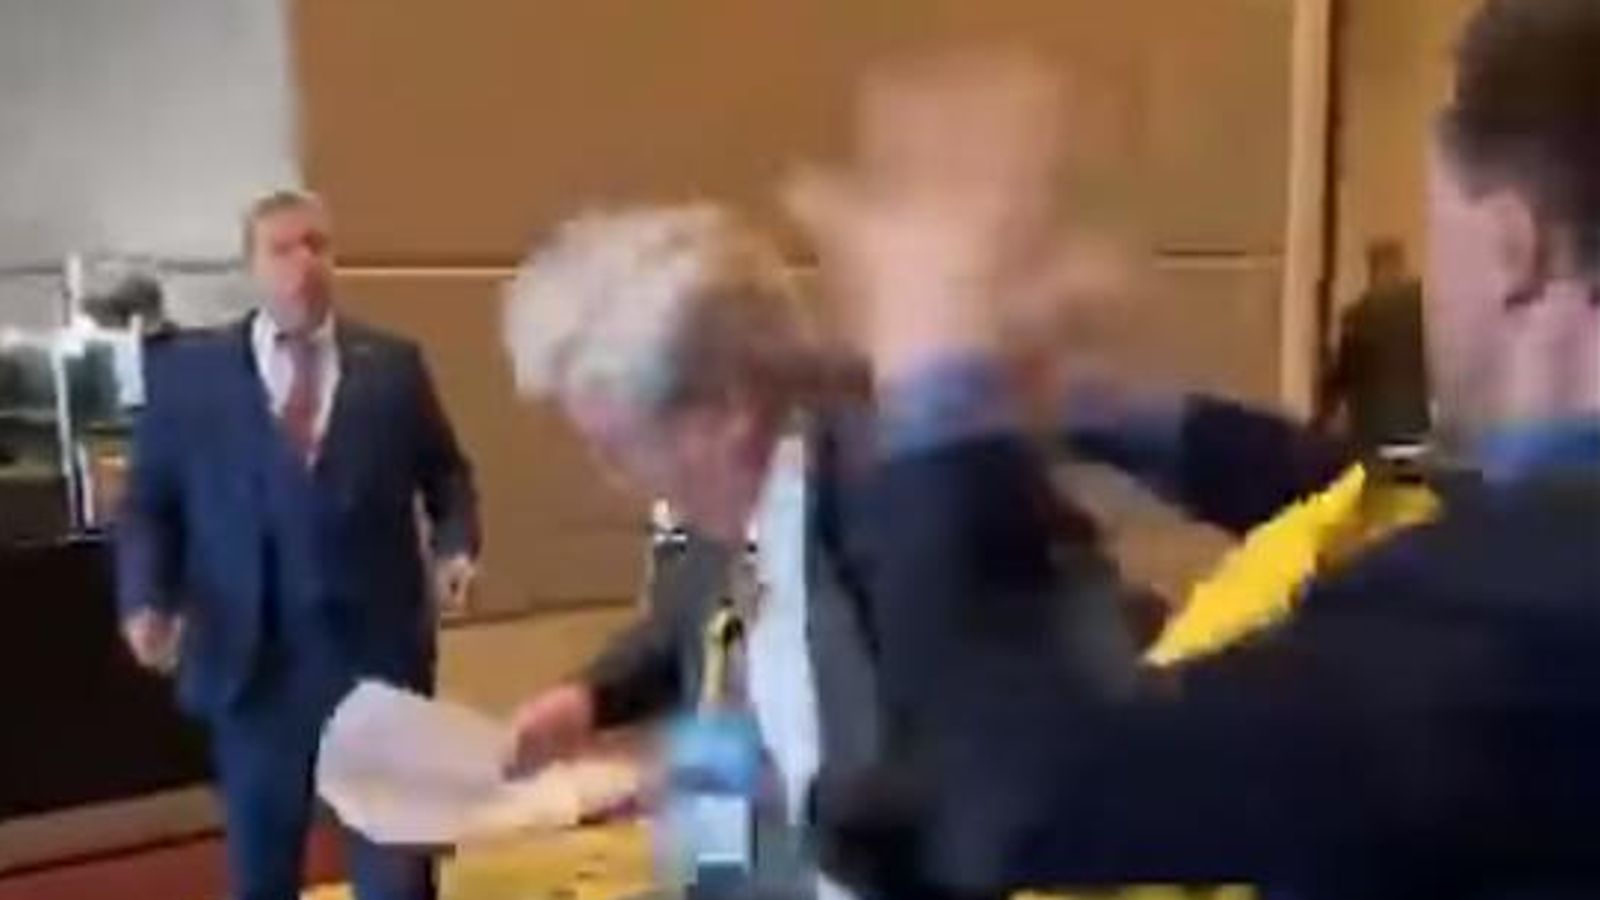 Moment fight breaks out between Russian and Ukrainian delegates at